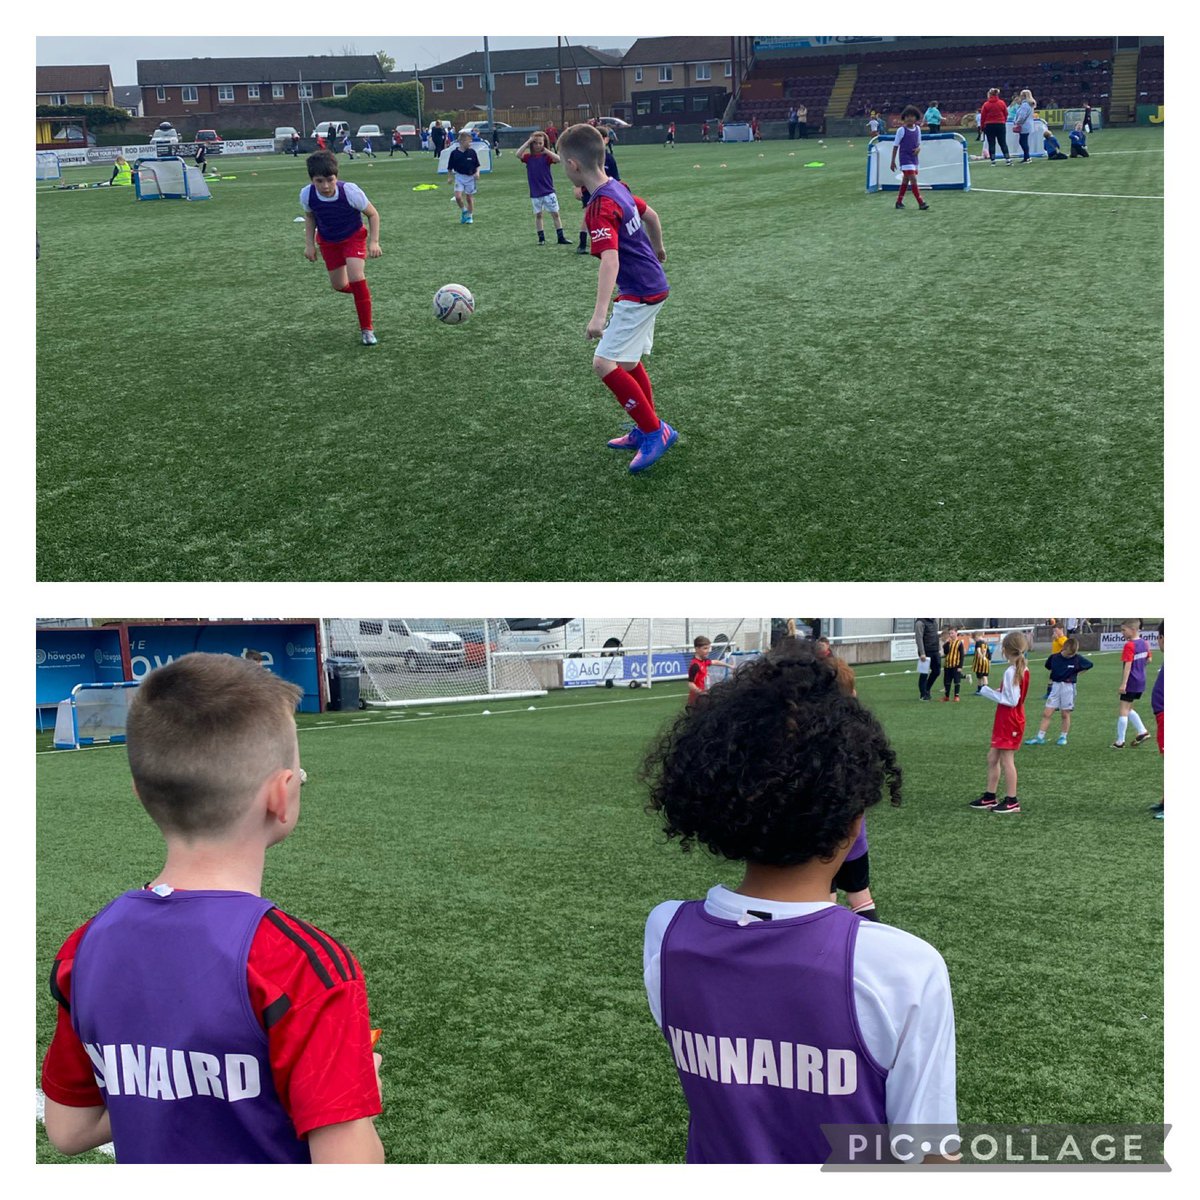 Well done to all P4 participants at our festival today. It was such a great event with lots of enjoyment experienced. Thank you to @FalkirkSport for organising and to everyone else who supported the event. @KPS_Primary4R @KPS_Primary4_5M @KPS_Primary4L @KPS_Primary4F